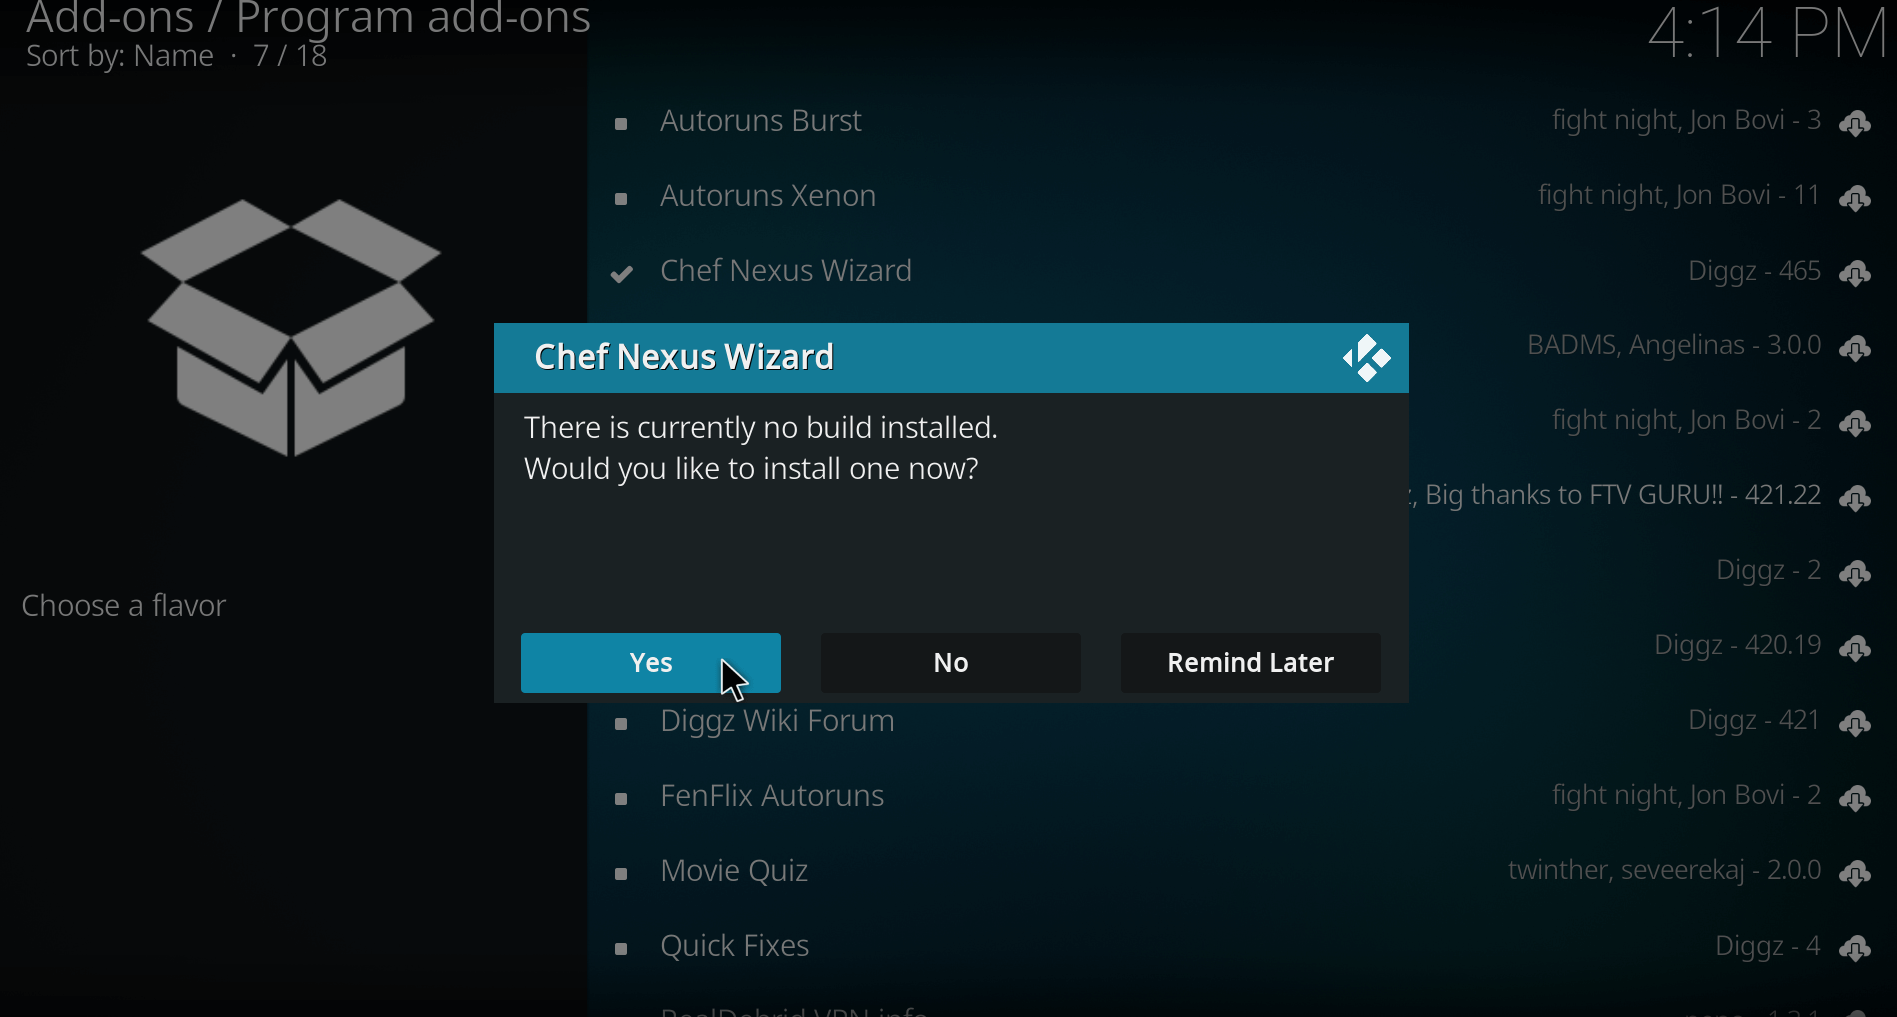 Select Yes for installing build on Chef nexus wizard